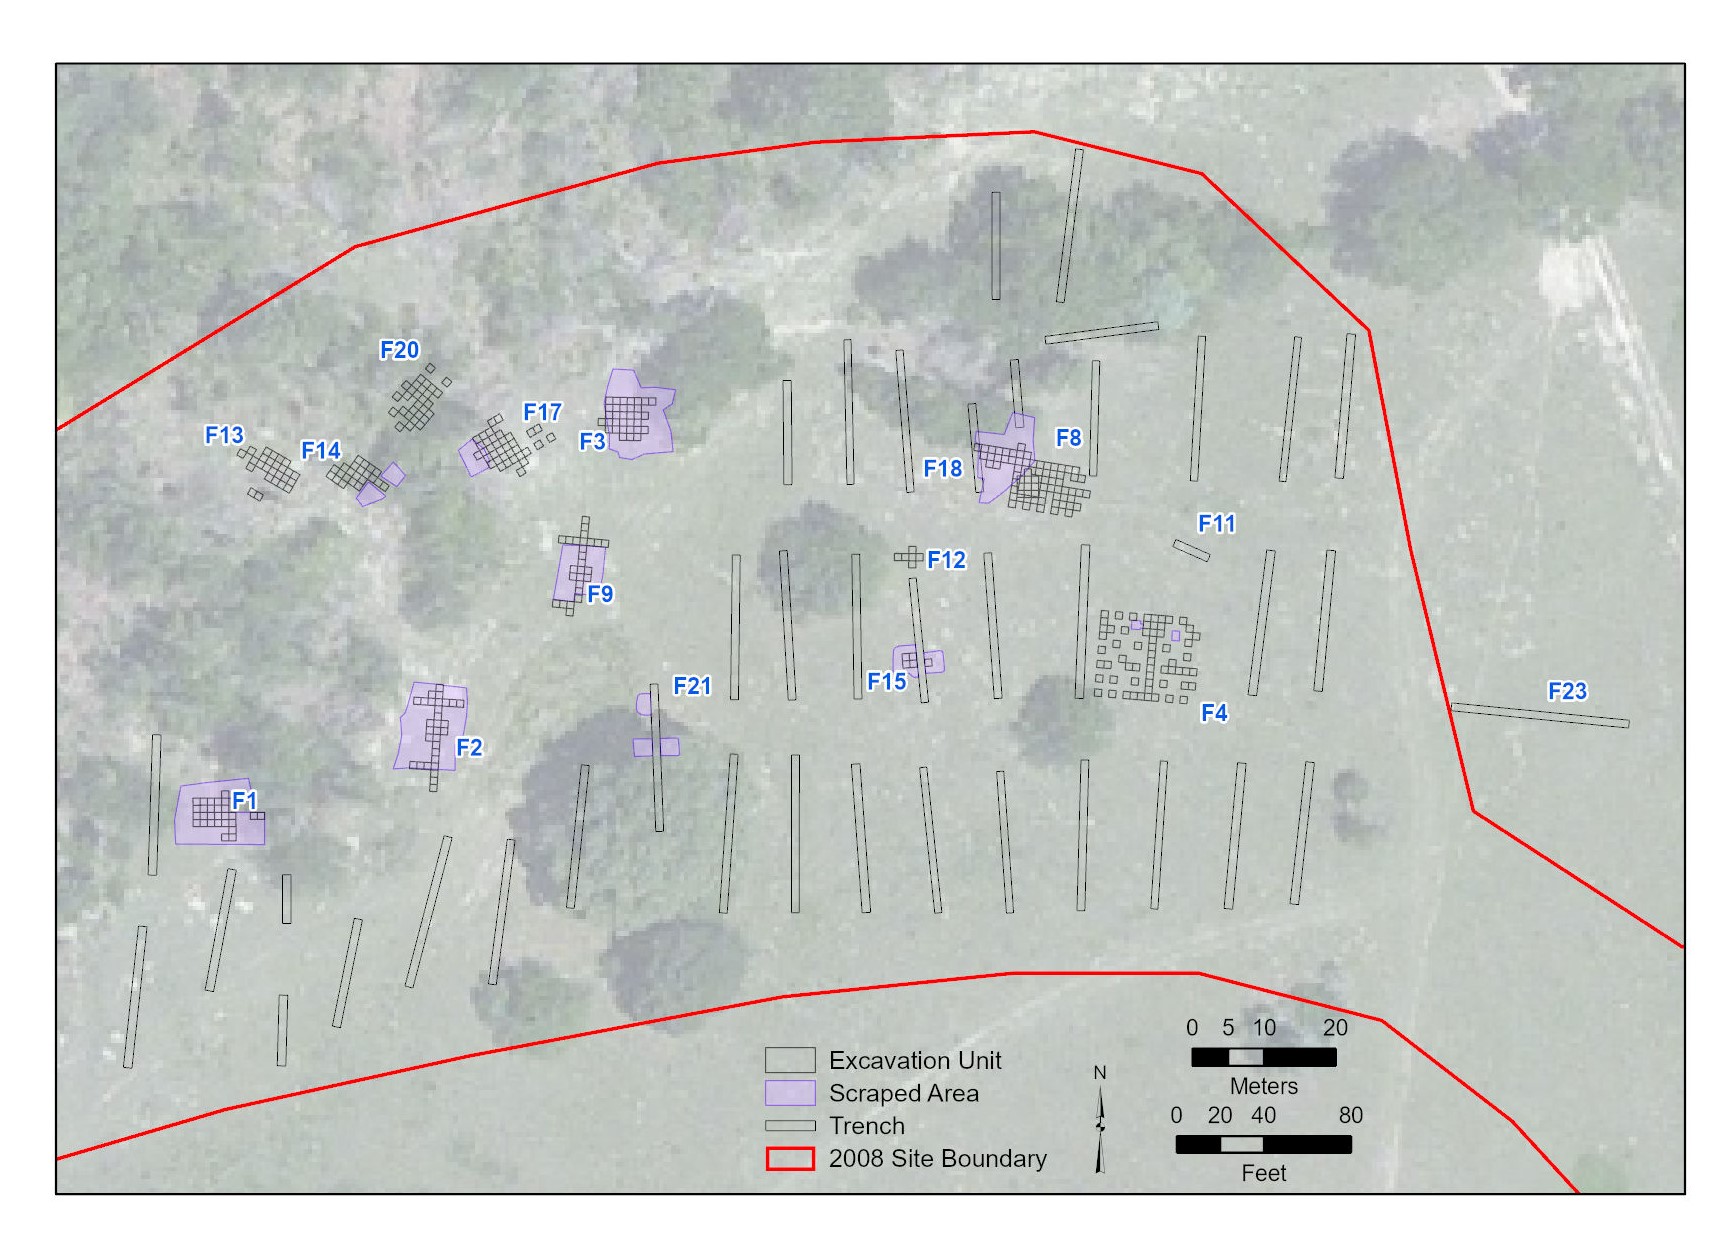 Graphic with a map of excavation areas superimposed on an aerial photograph.